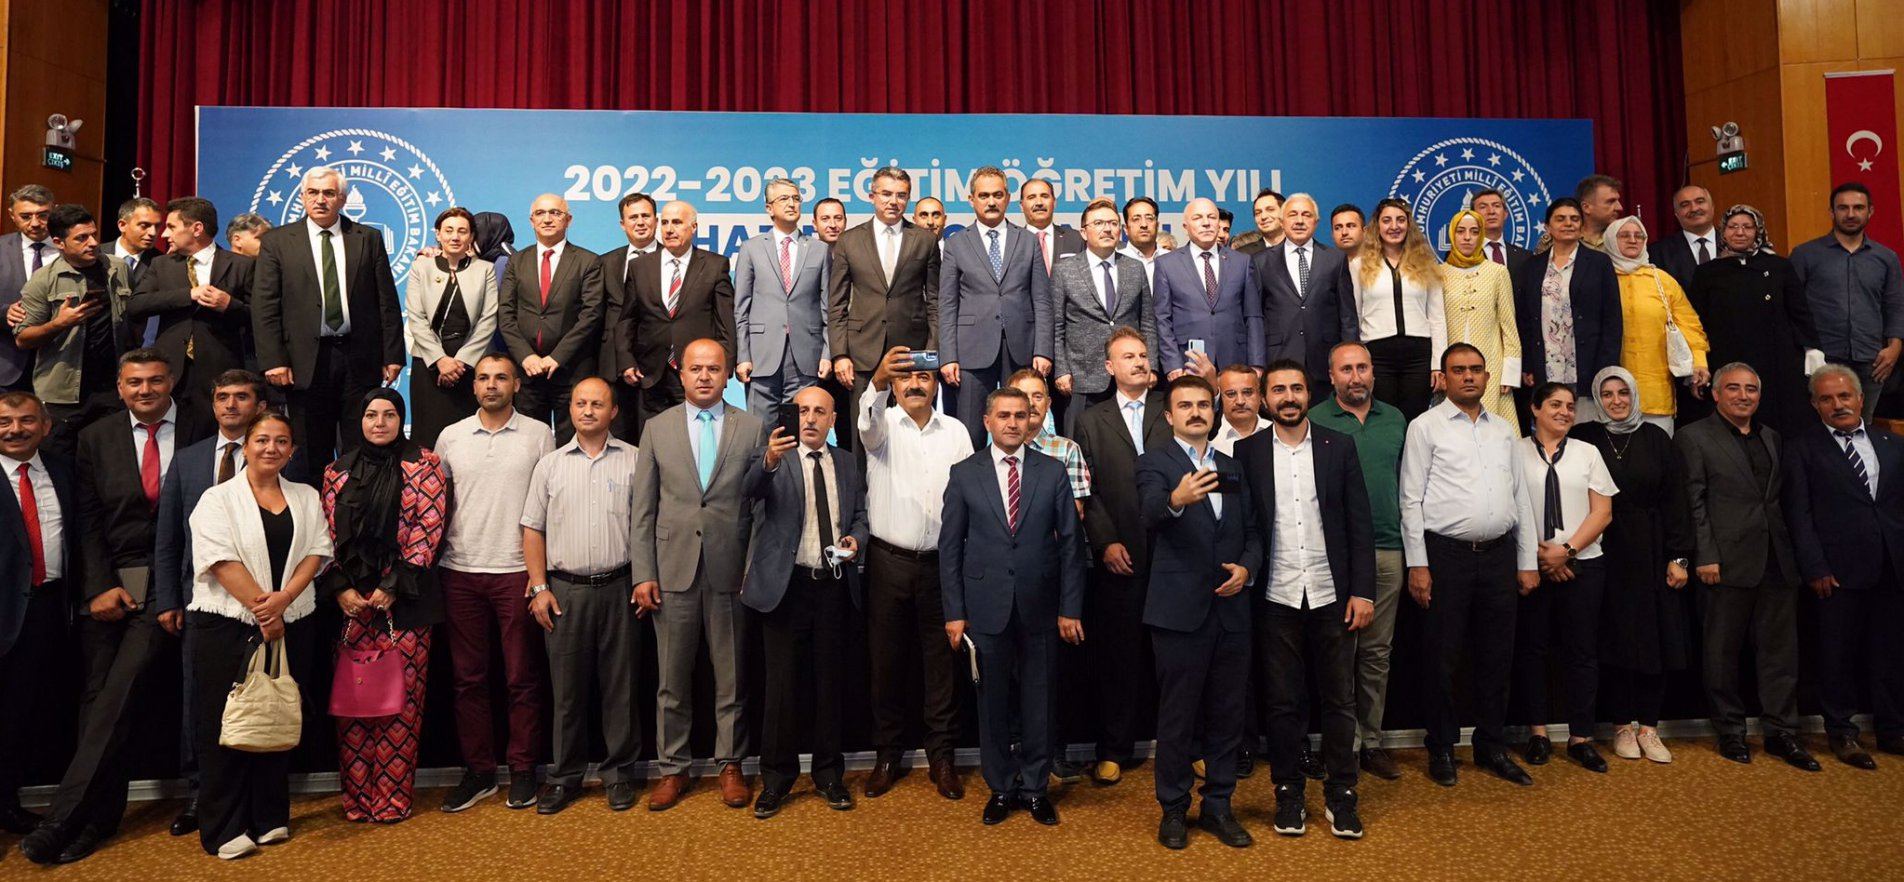 MINISTER ÖZER GOT TOGETHER WITH SCHOOL PRINCIPALS IN ERZURUM AS A PART OF THE 2022-2023 SCHOOL YEAR PREPARATIONS